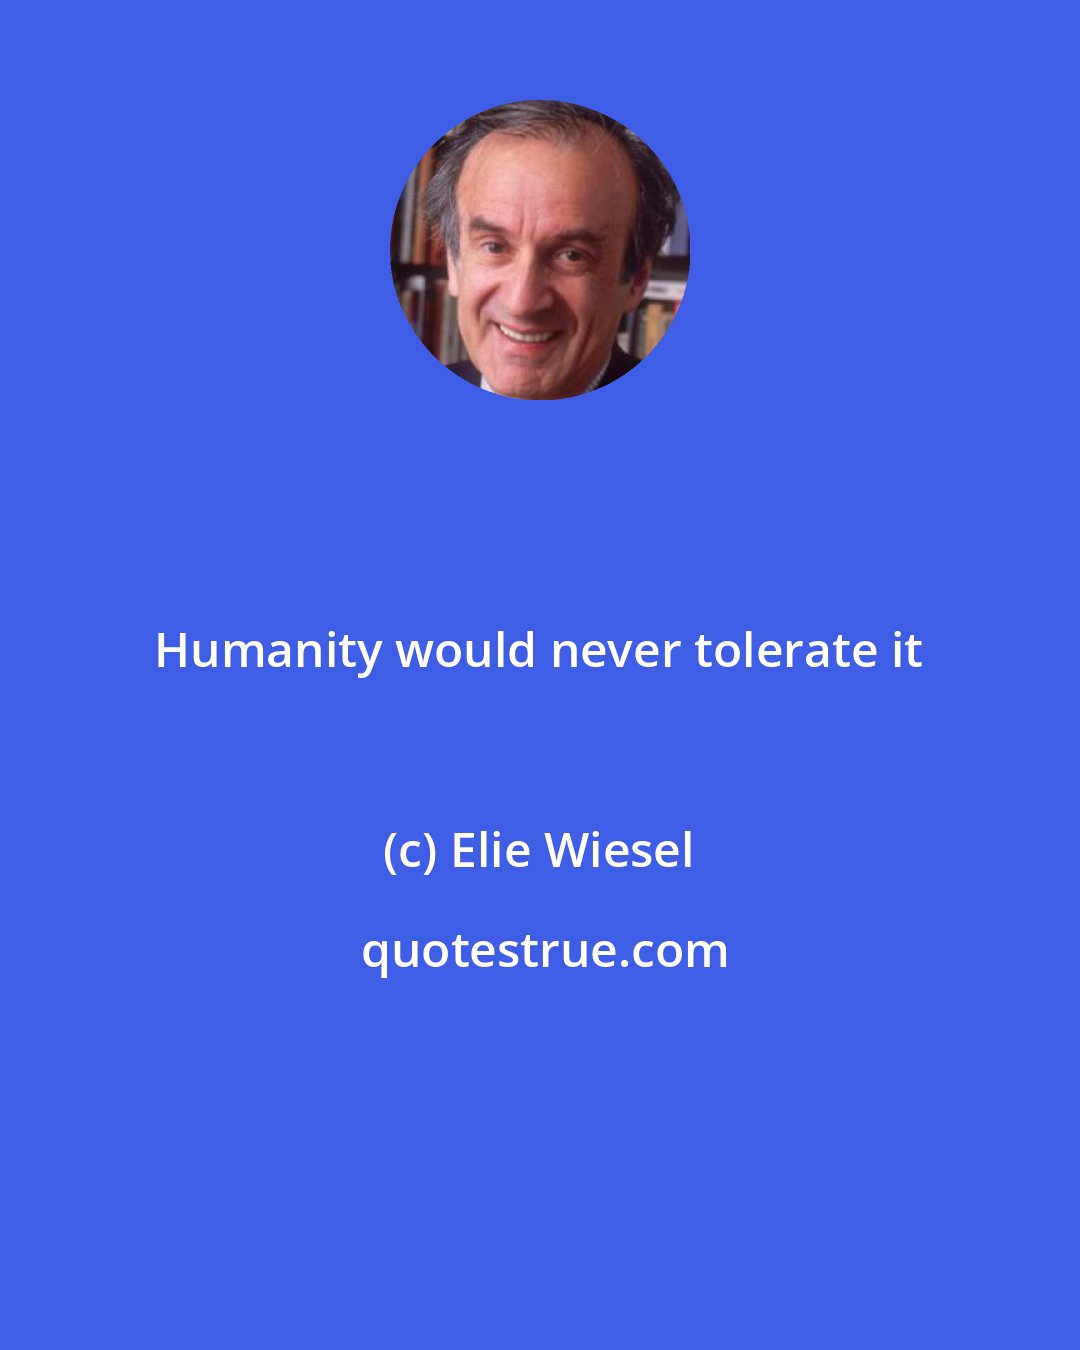 Elie Wiesel: Humanity would never tolerate it